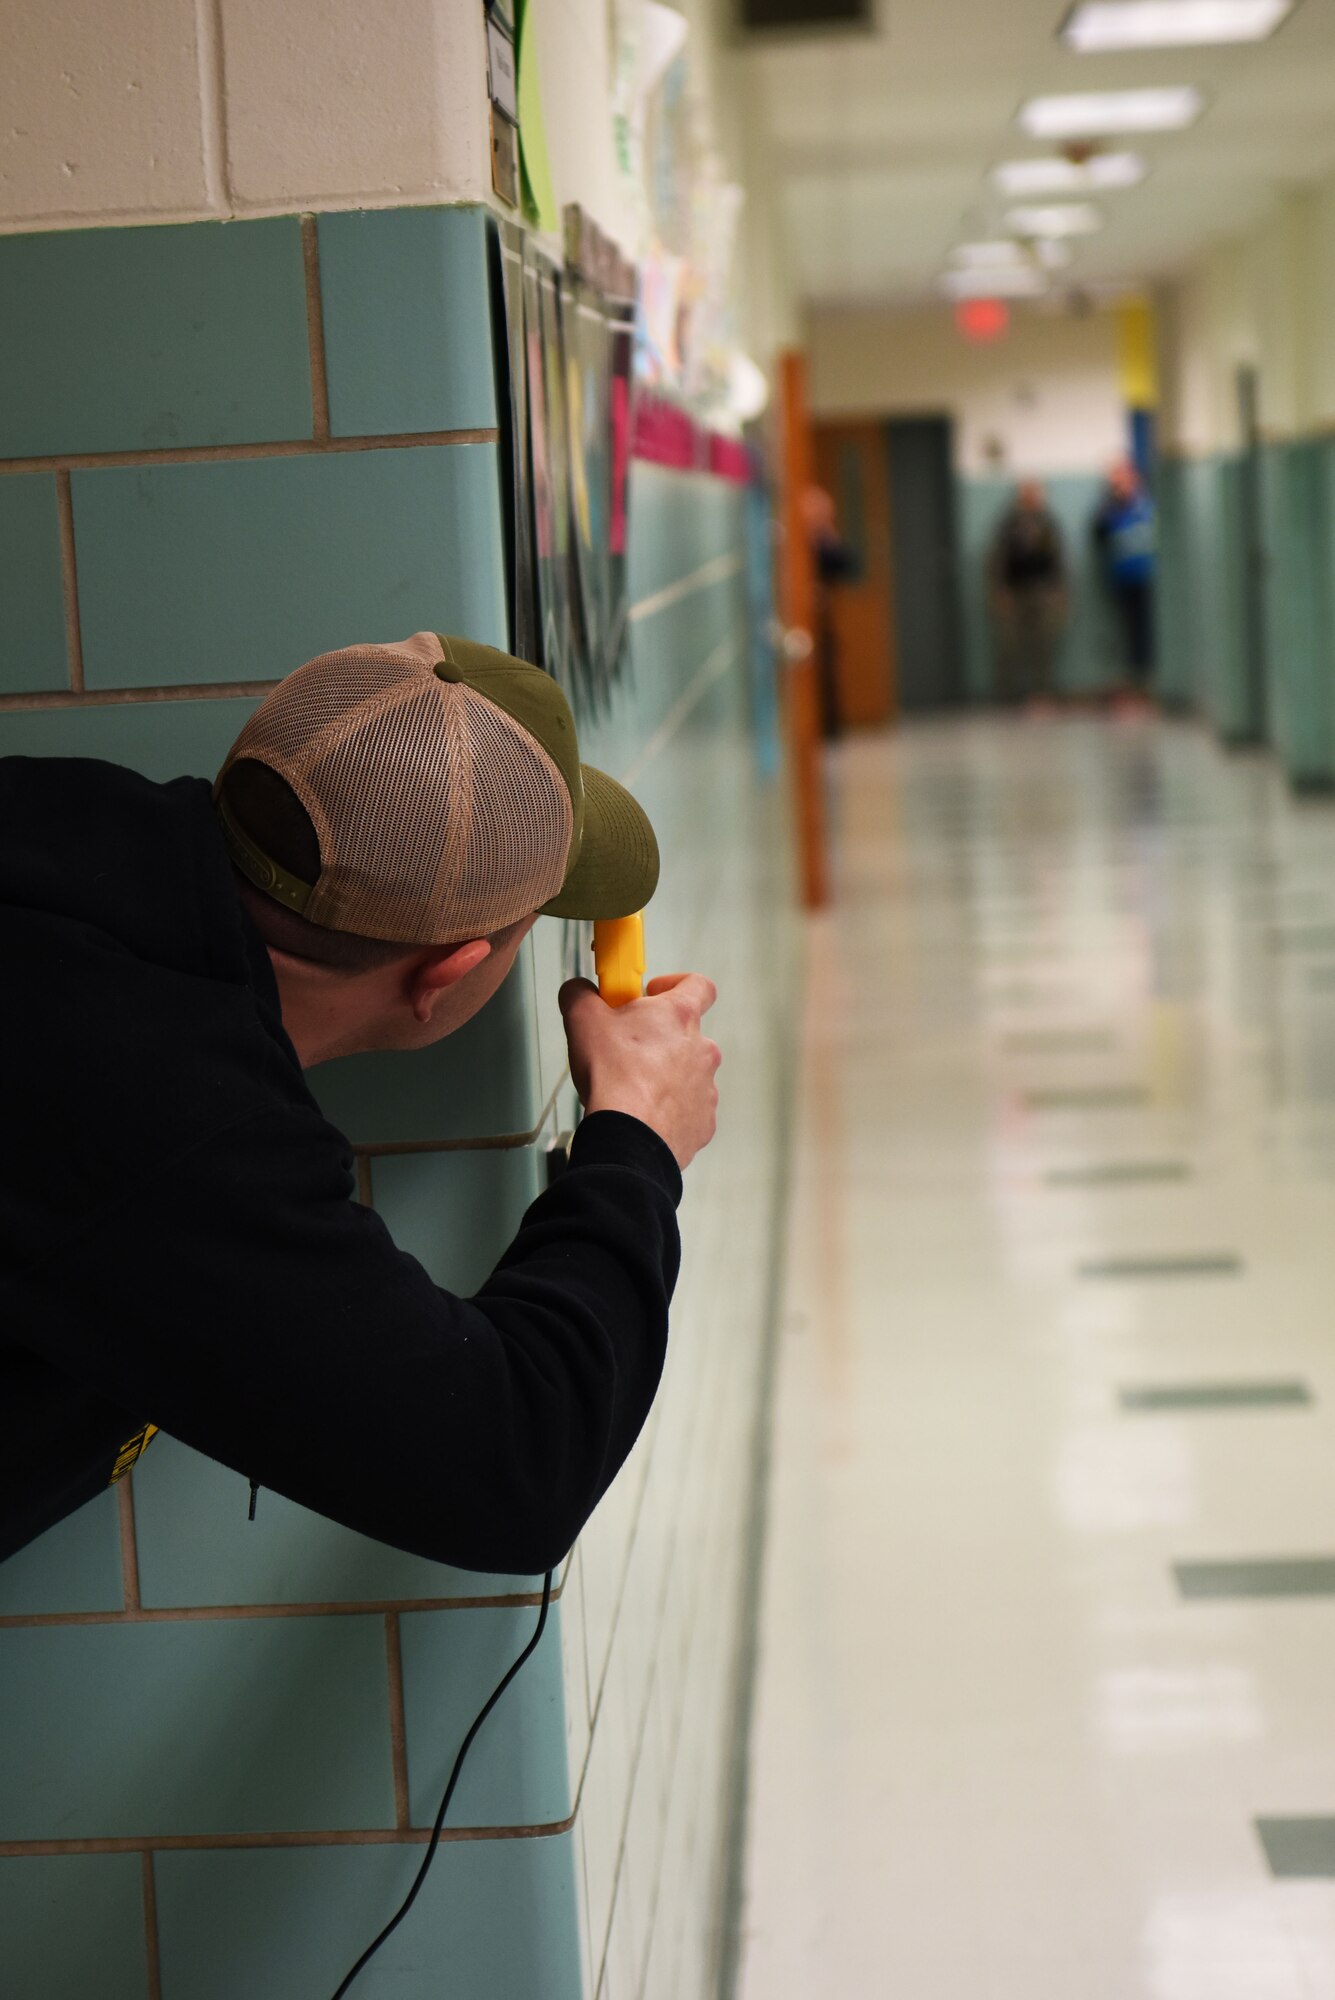 Staff Sgt. Bernard Pecoraro, 436th Security Forces Squadron military working dog handler, acts as a gunman during an active shooter exercise at the George S. Welch Elementary School and Dover Air Force Base Middle School Feb. 26, 2018, on Dover AFB, Del. The exercise was meant to train and evaluate the response of Security Forces to an actual event. (U.S. Air Force photo by Airman 1st Class Zoe M. Wockenfuss)